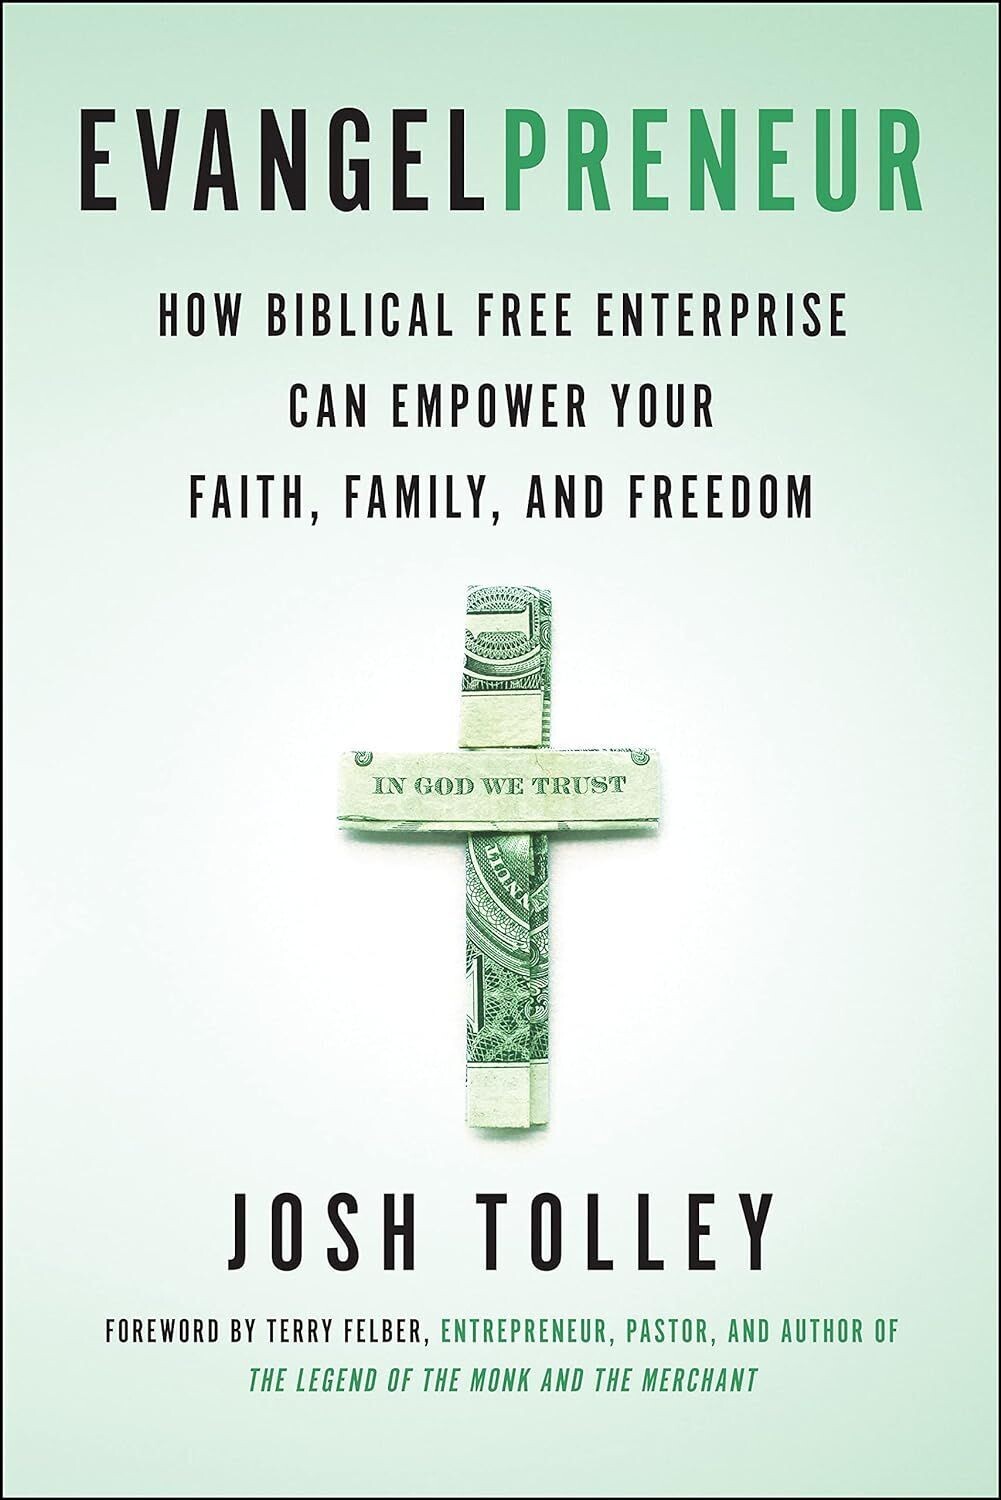 Evangelpreneur, Revised and Expanded Edition: How Biblical Free Enterprise Can Empower Your Faith, Family, and Freedom